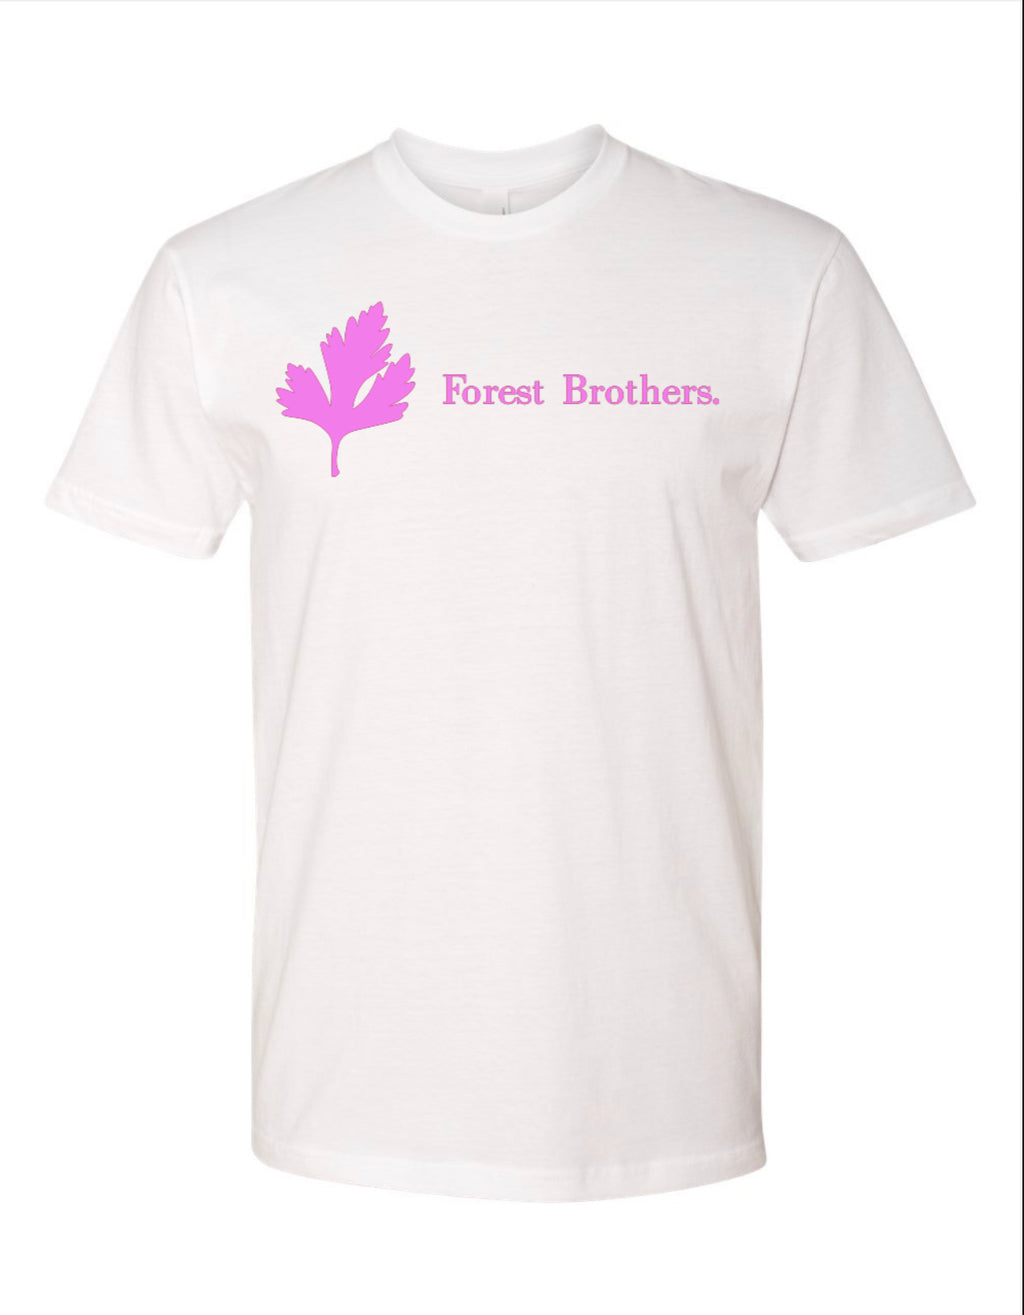 PINK(WHITE) FOREST BROTHERS T-SHIRT